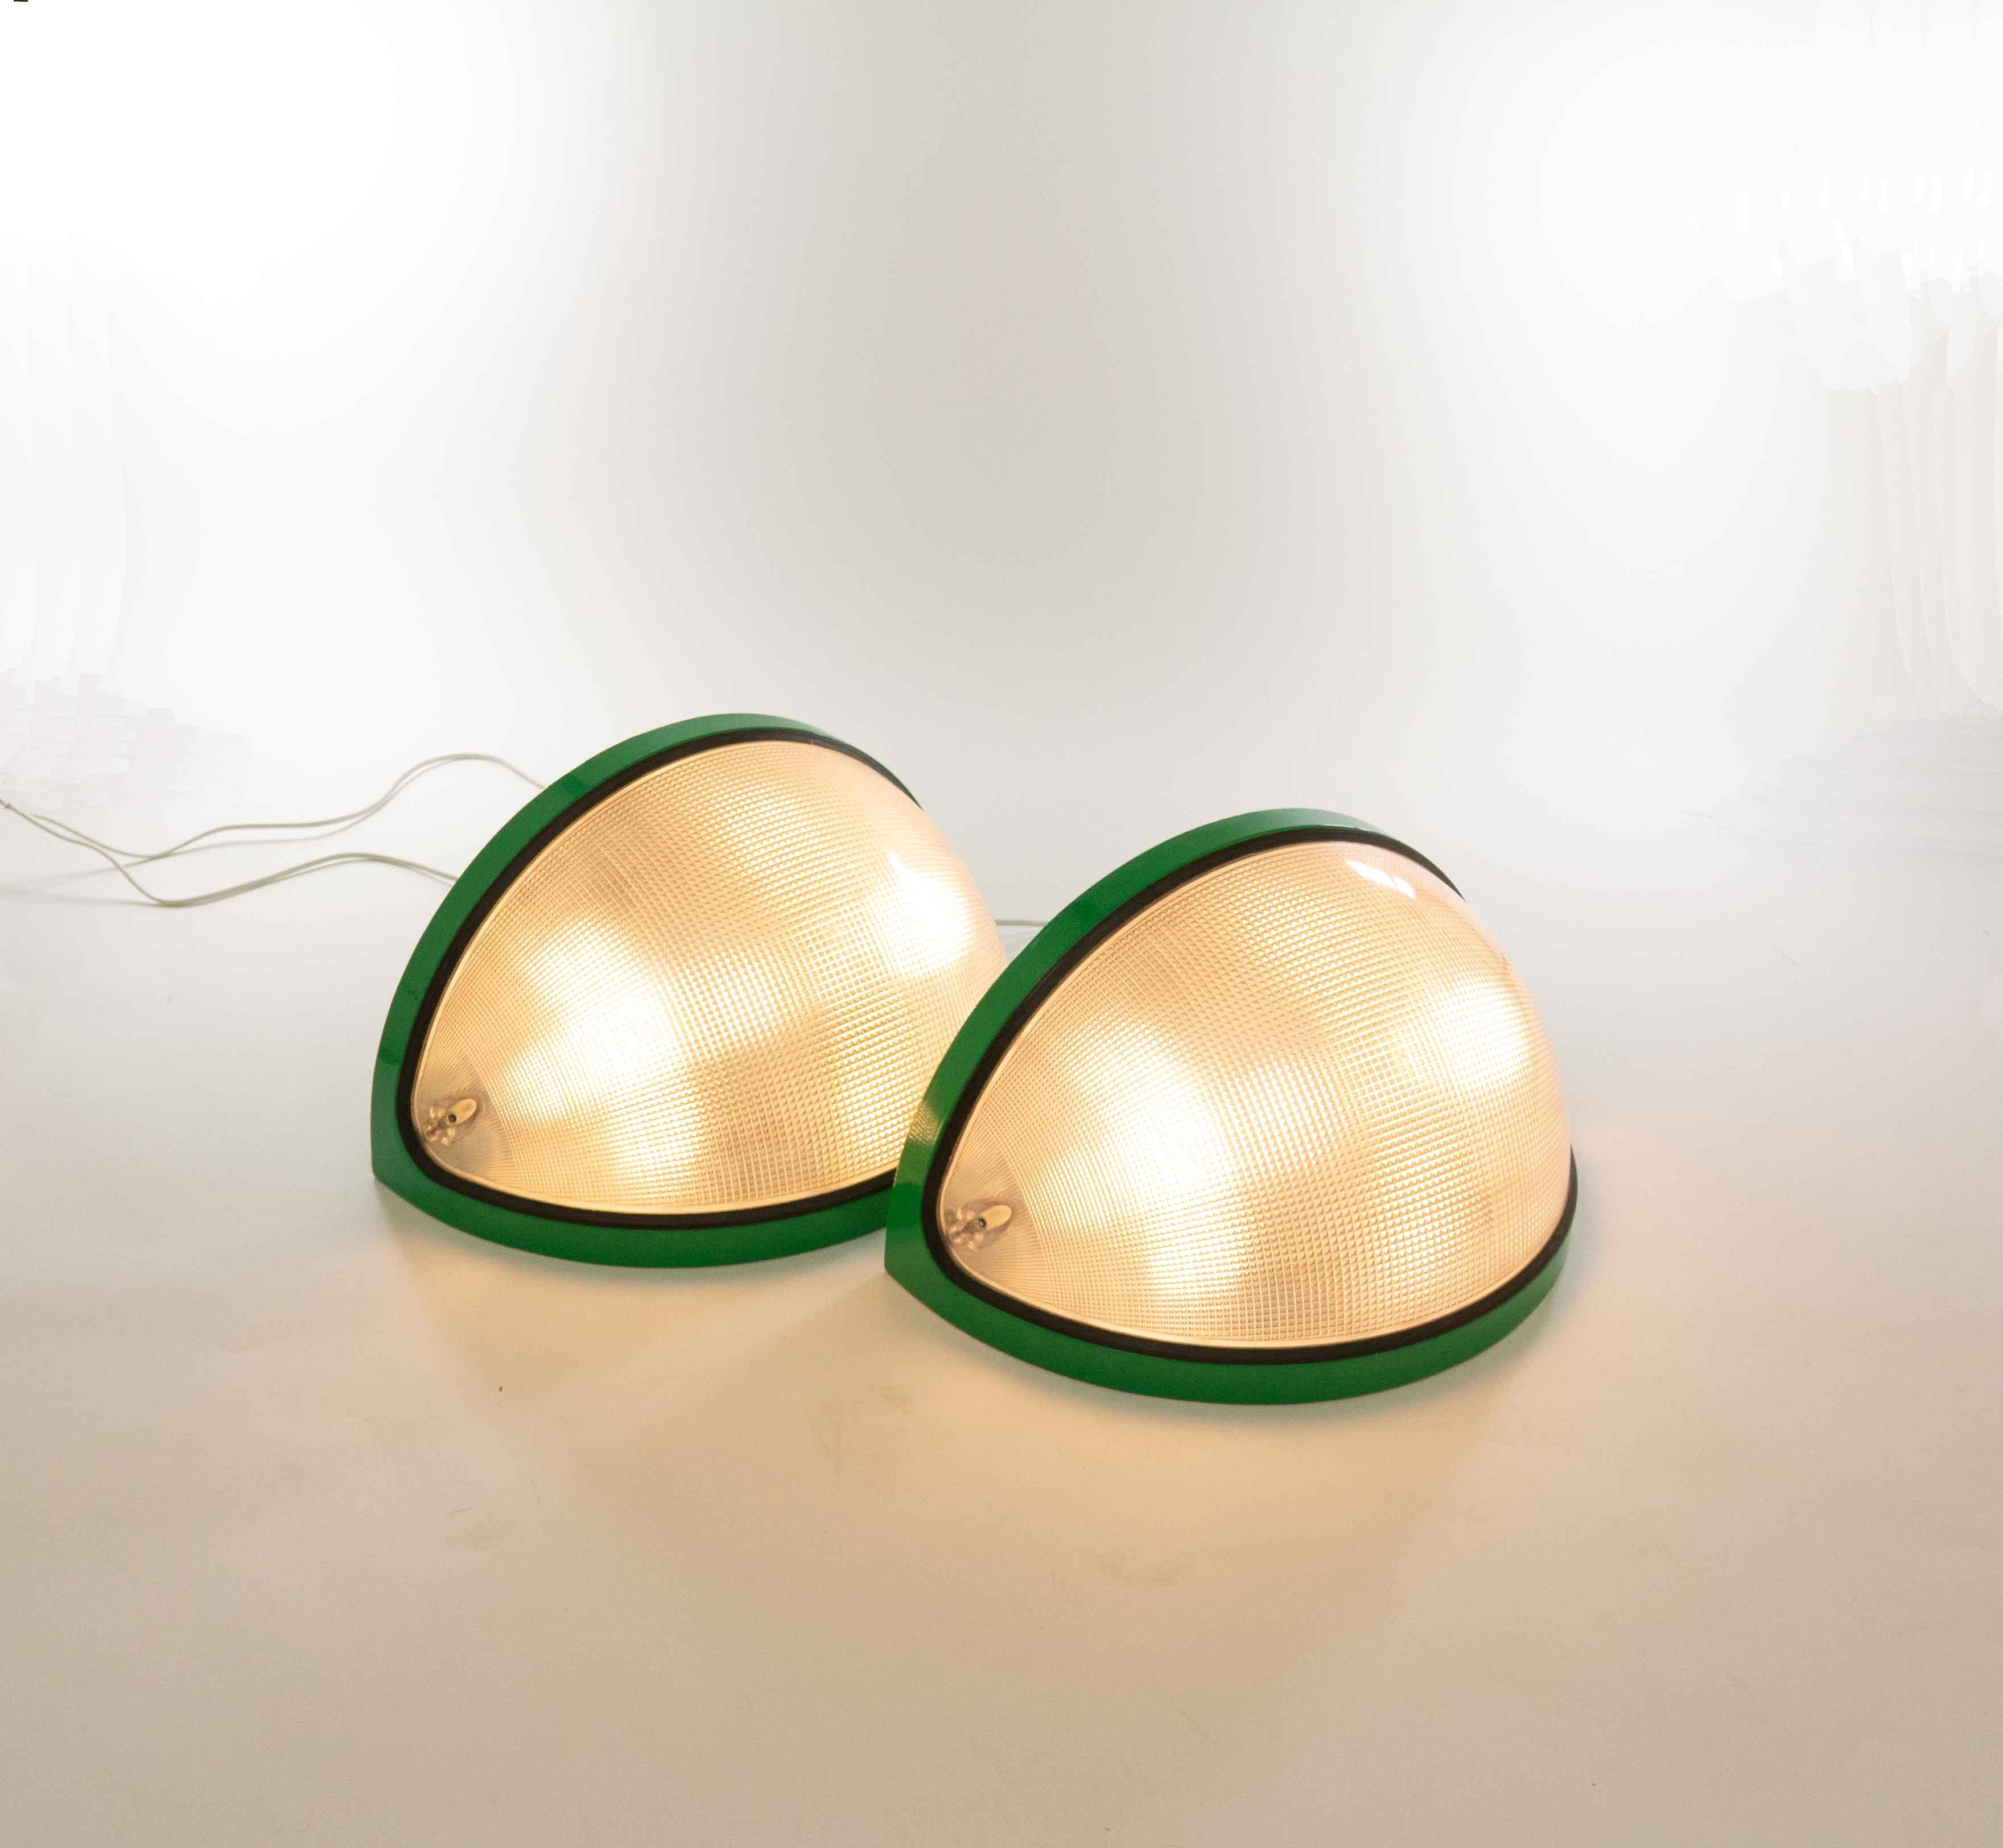 A pair of large Totum floor lamps designed by Gian Nicola Gigante, Marilena Boccato and Antonio Zambusi for Zerbetto Padova in 1975.

The pair consists of two equal quarters of a sphere made of prismatic methacrylate and lacquered aluminum. There